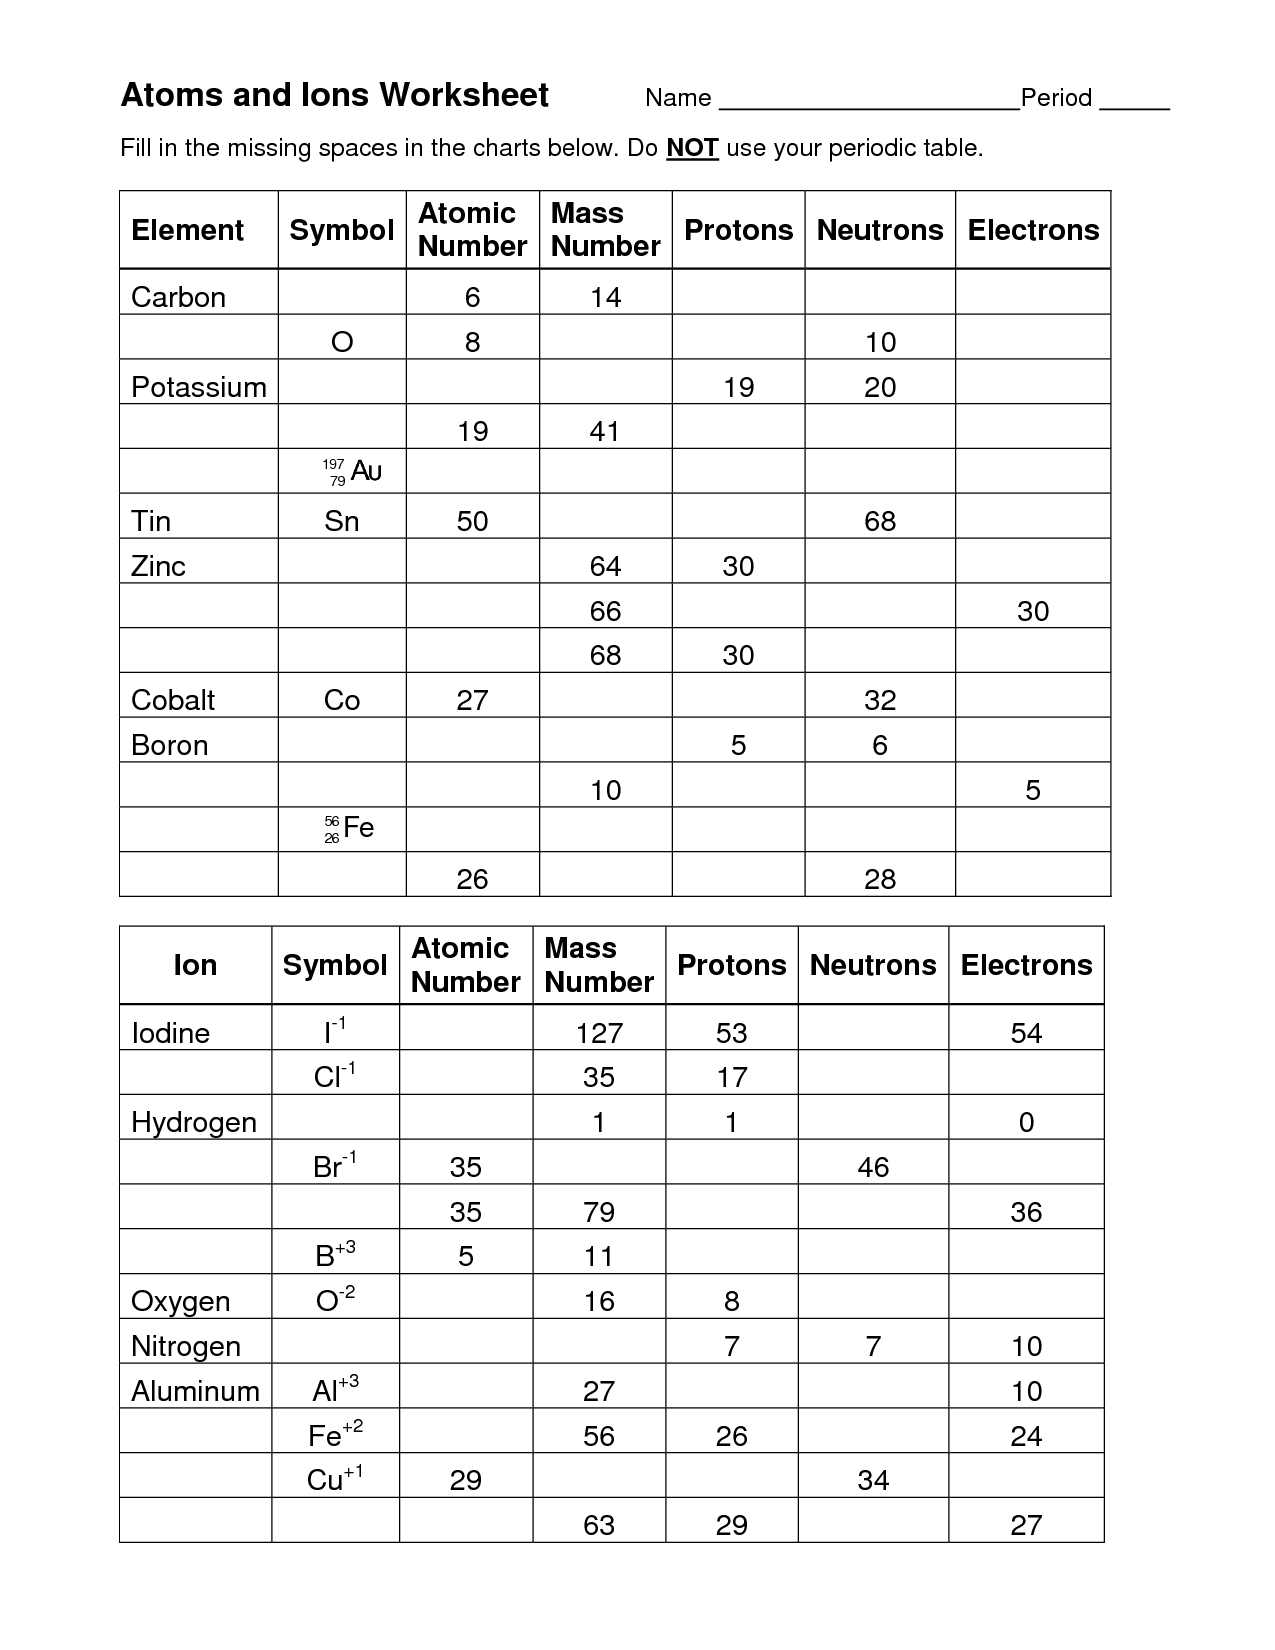  Ions Worksheet Answer Key Free Download Qstion co